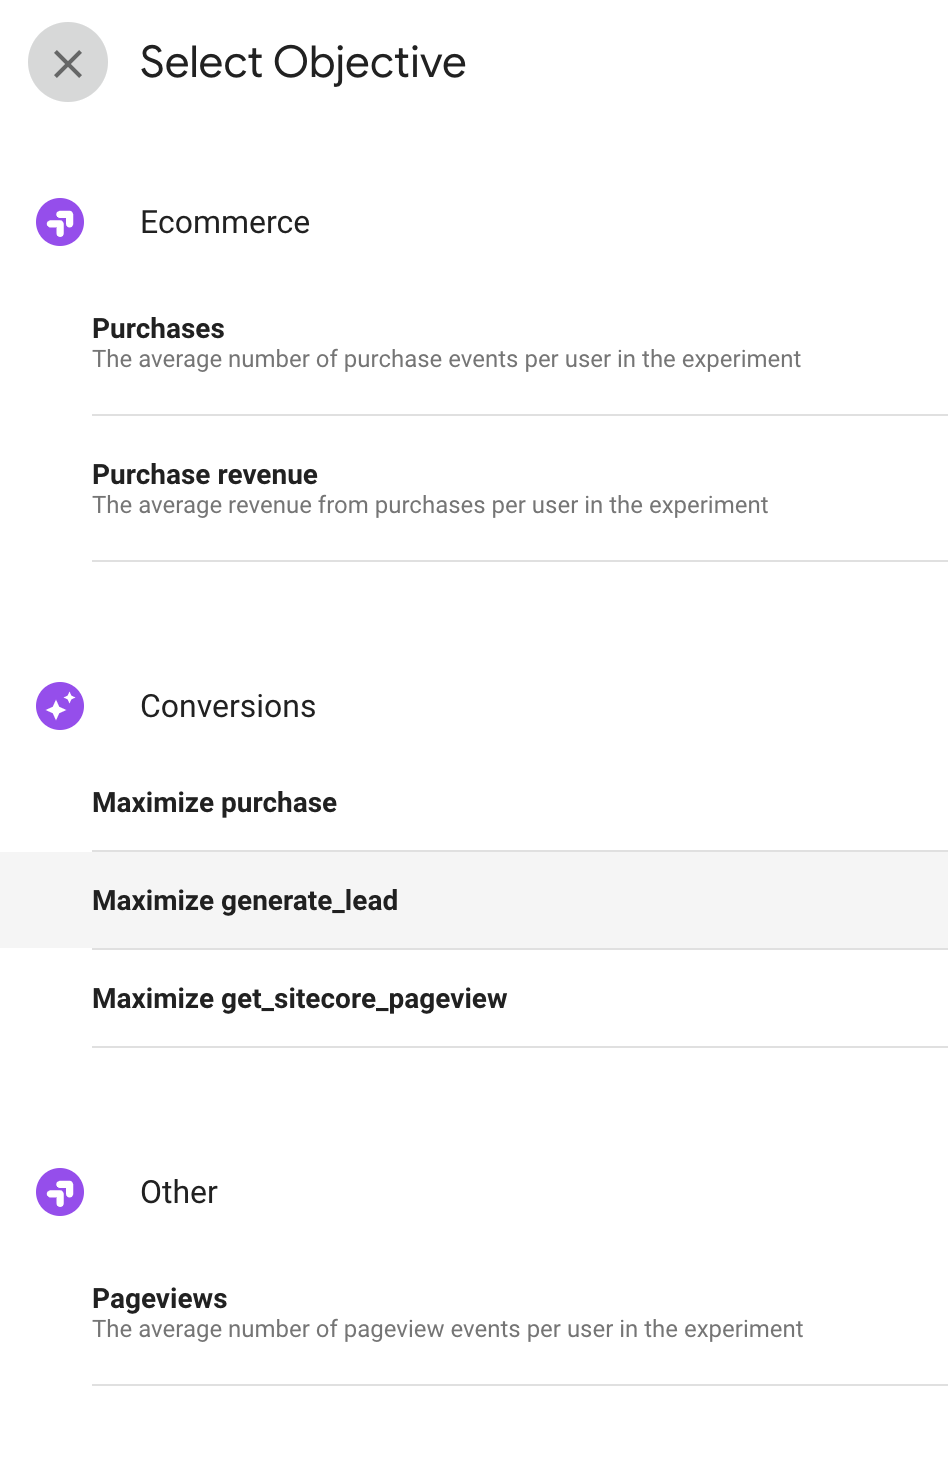 Adding experiment objectives in Google Optimize